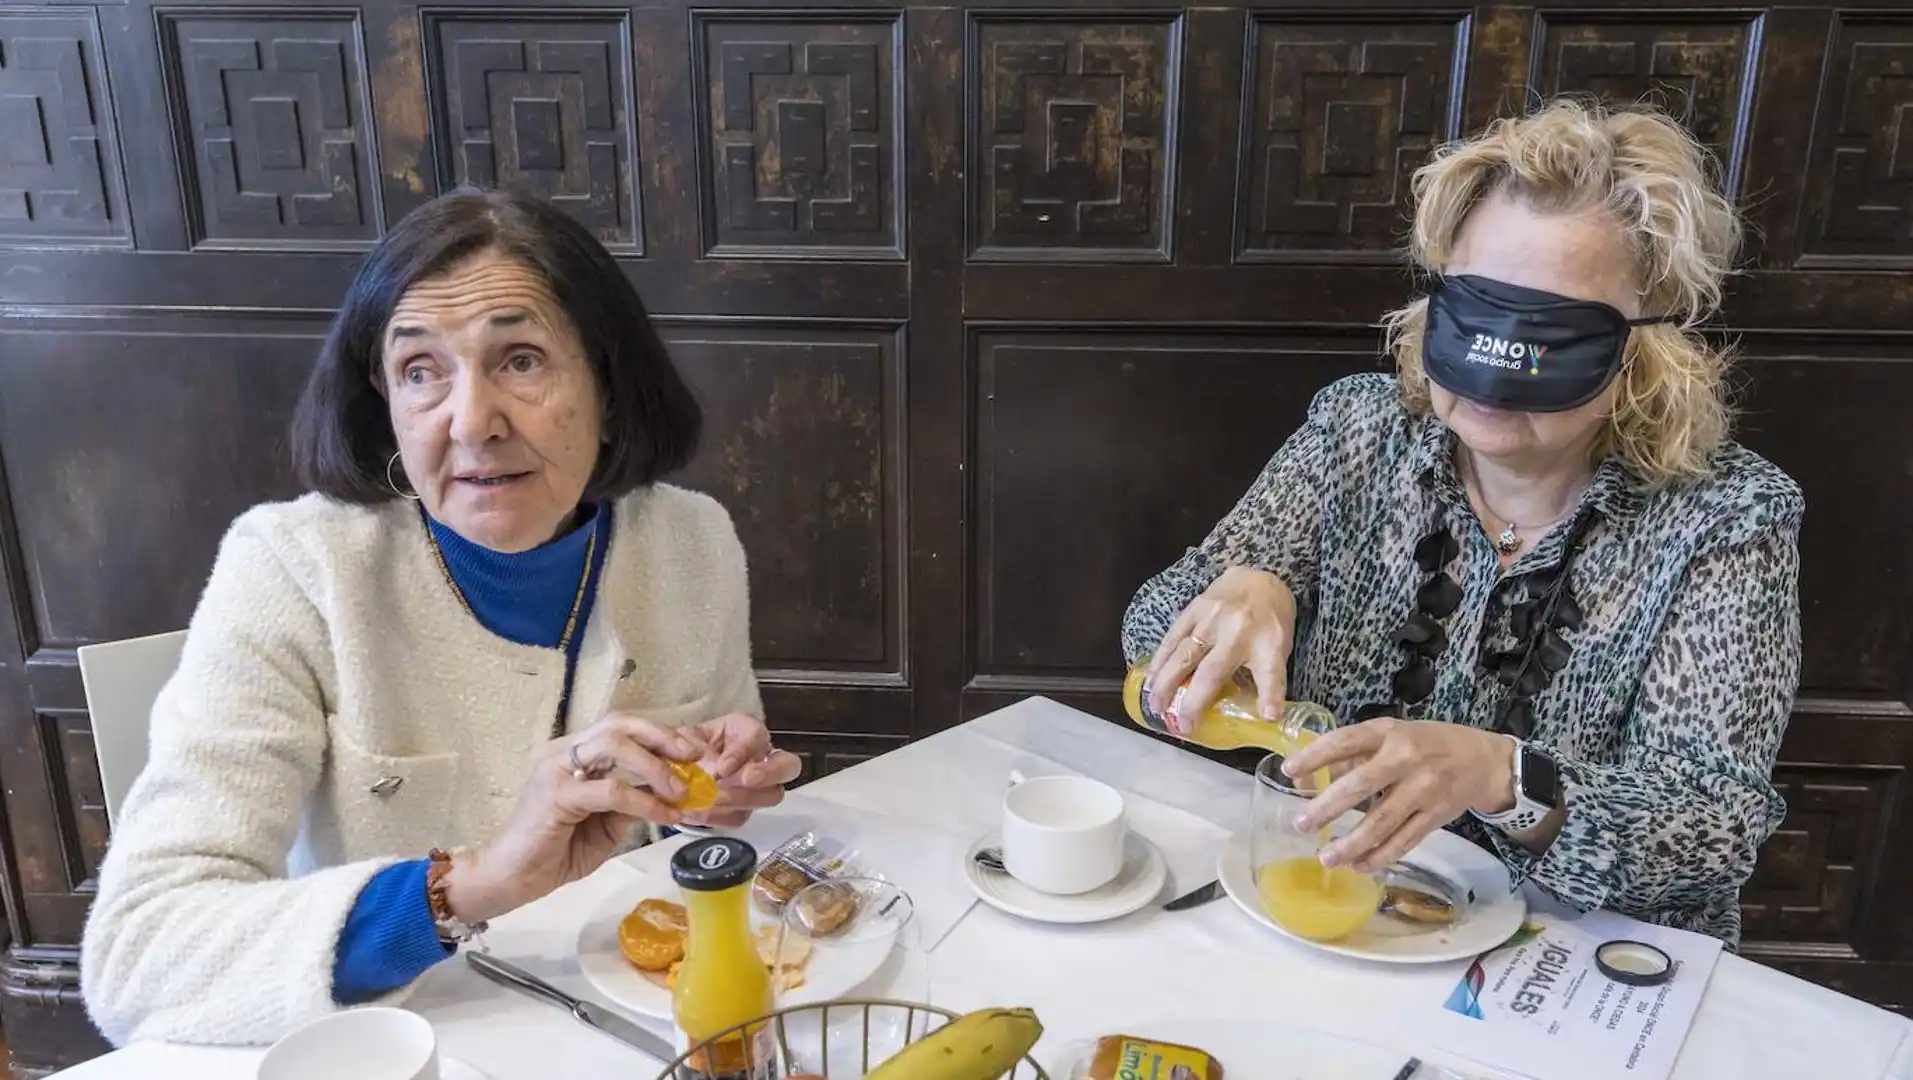 A blind breakfast to live an inclusive experience